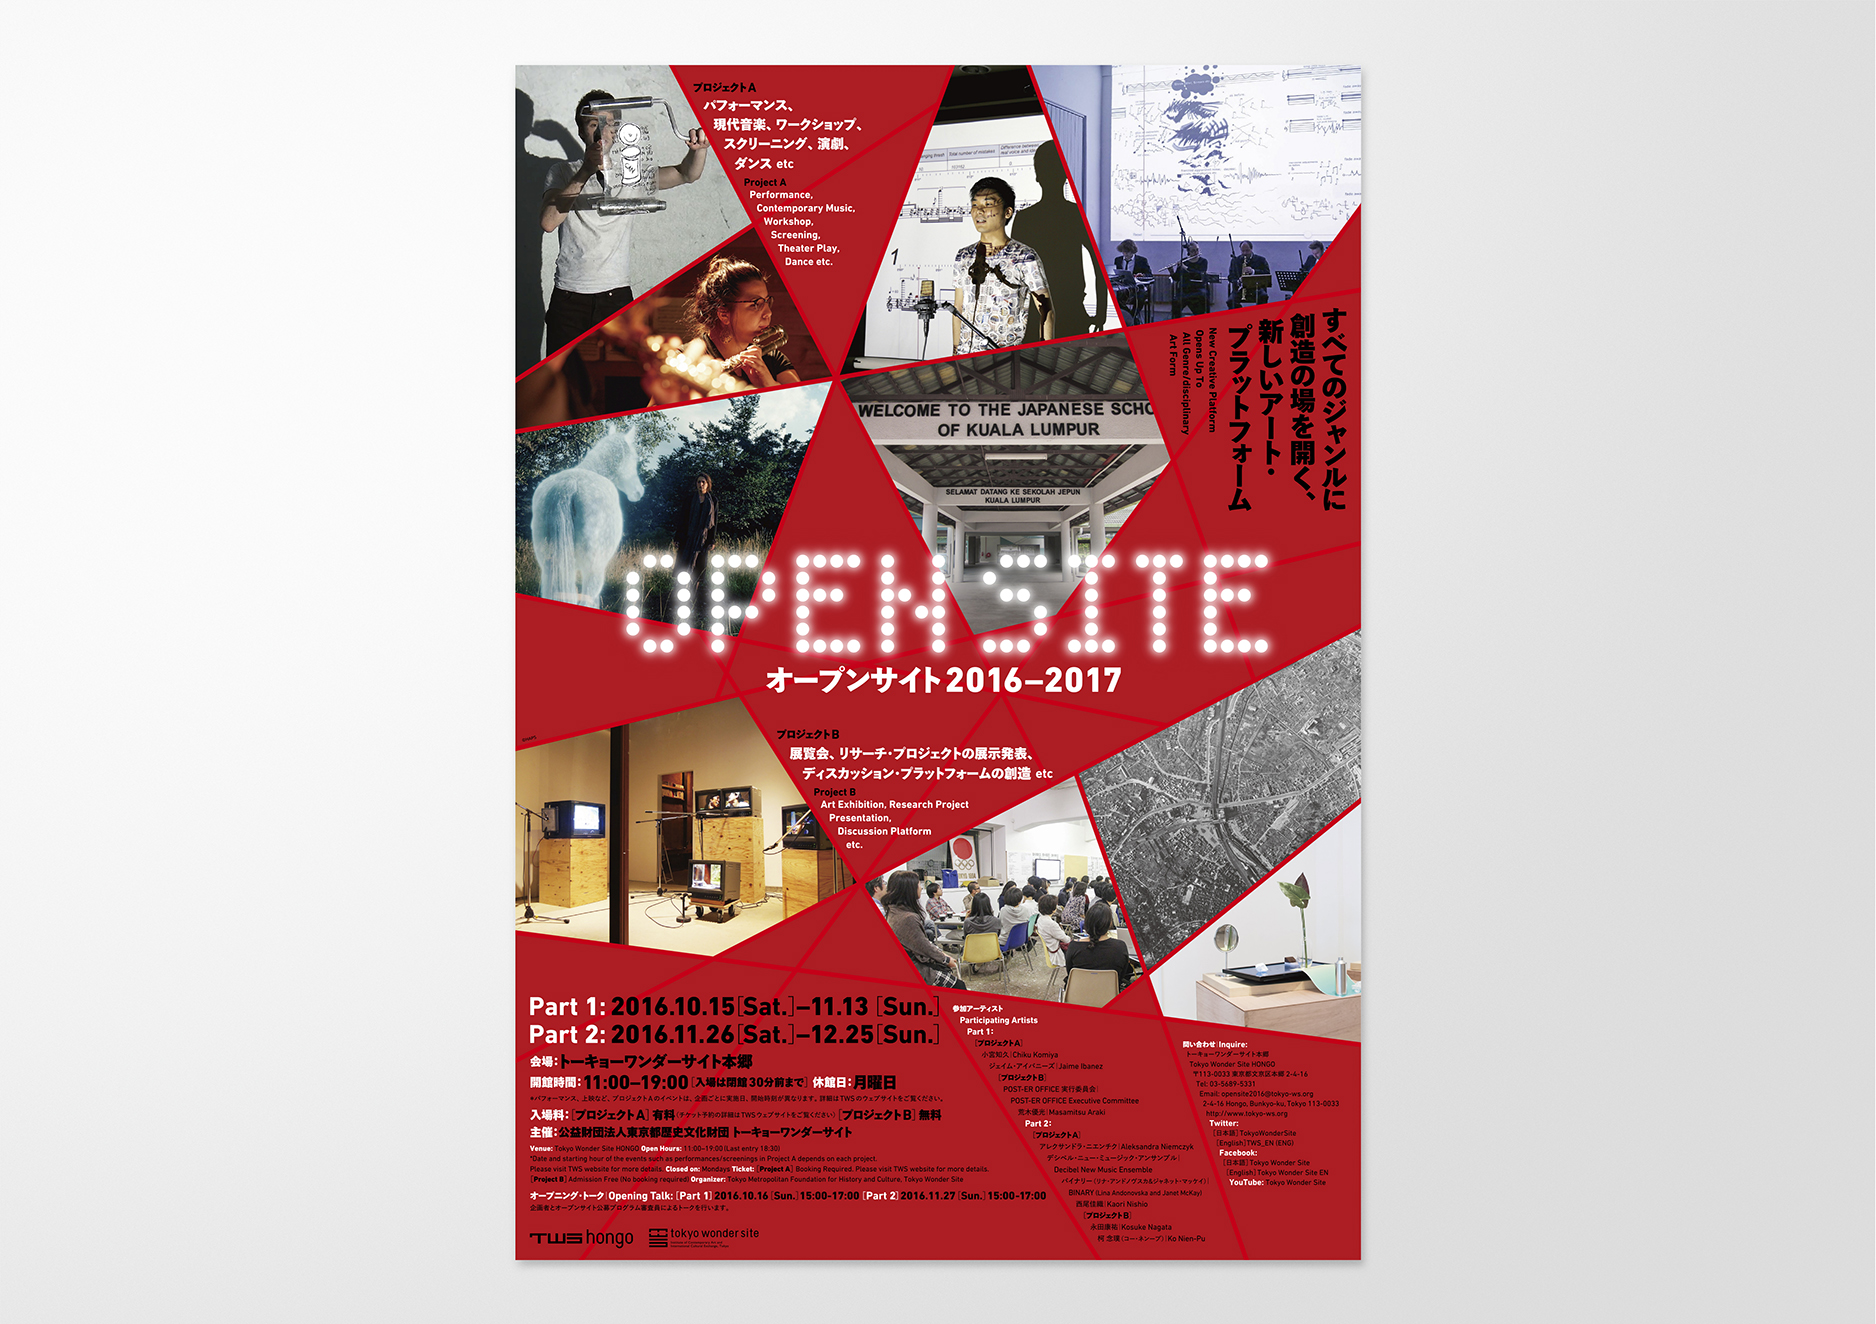 opensite16-17-1_poster_01